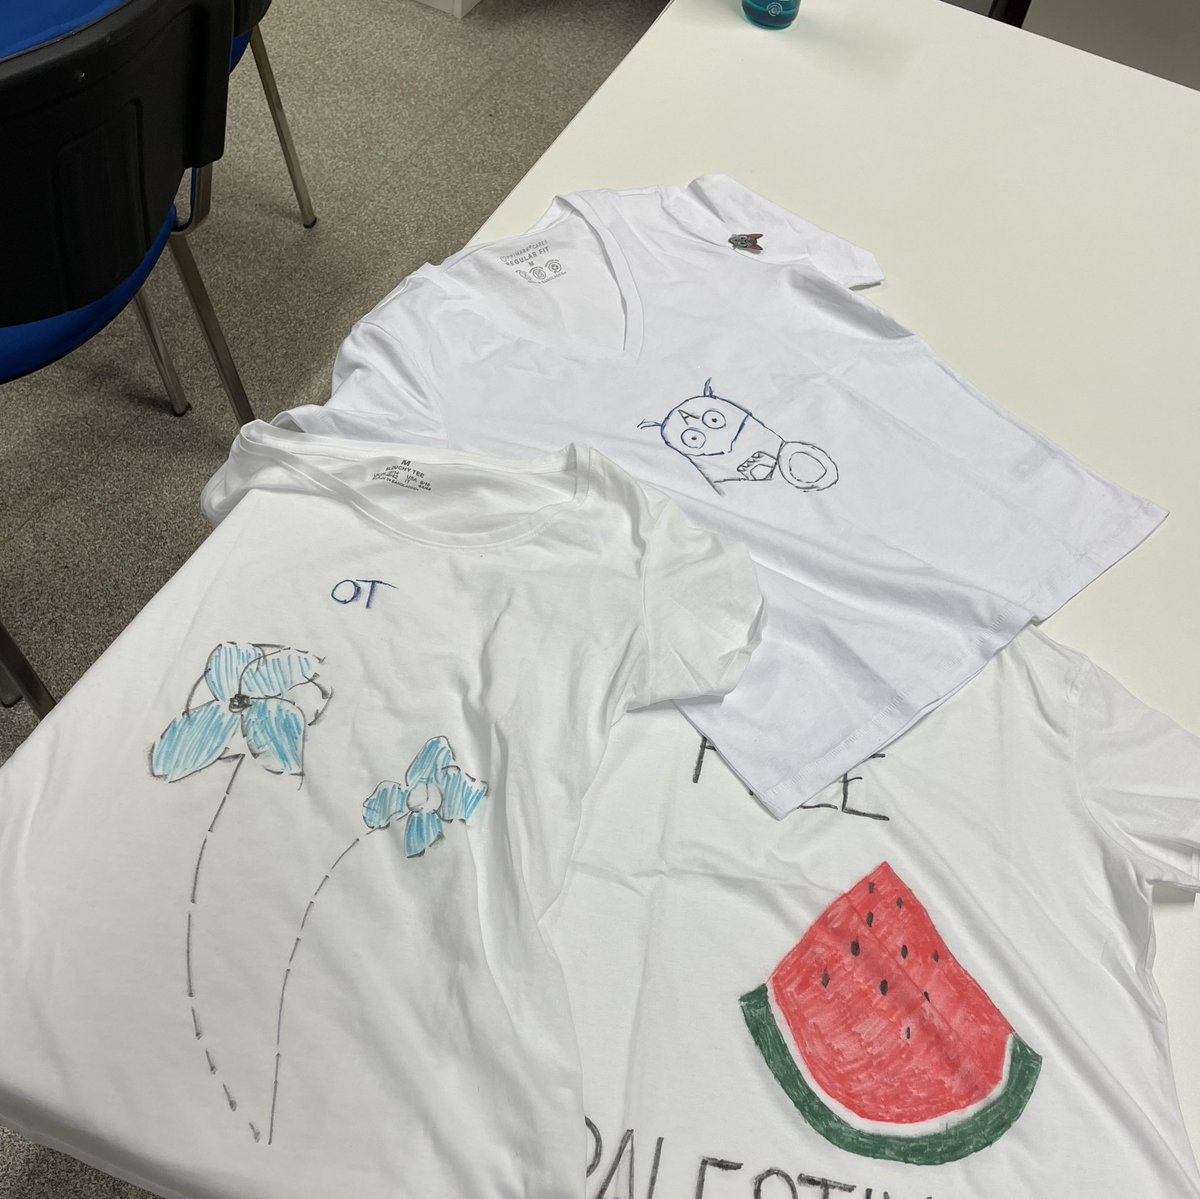 Exciting day at the MSc presentation as students showcase their PBL projects in forensic medicine! 👥 Collaborative efforts shine, and the cherry on top? Stylish T-shirts commemorating the exploration and teamwork. #MScStudents #SGUL